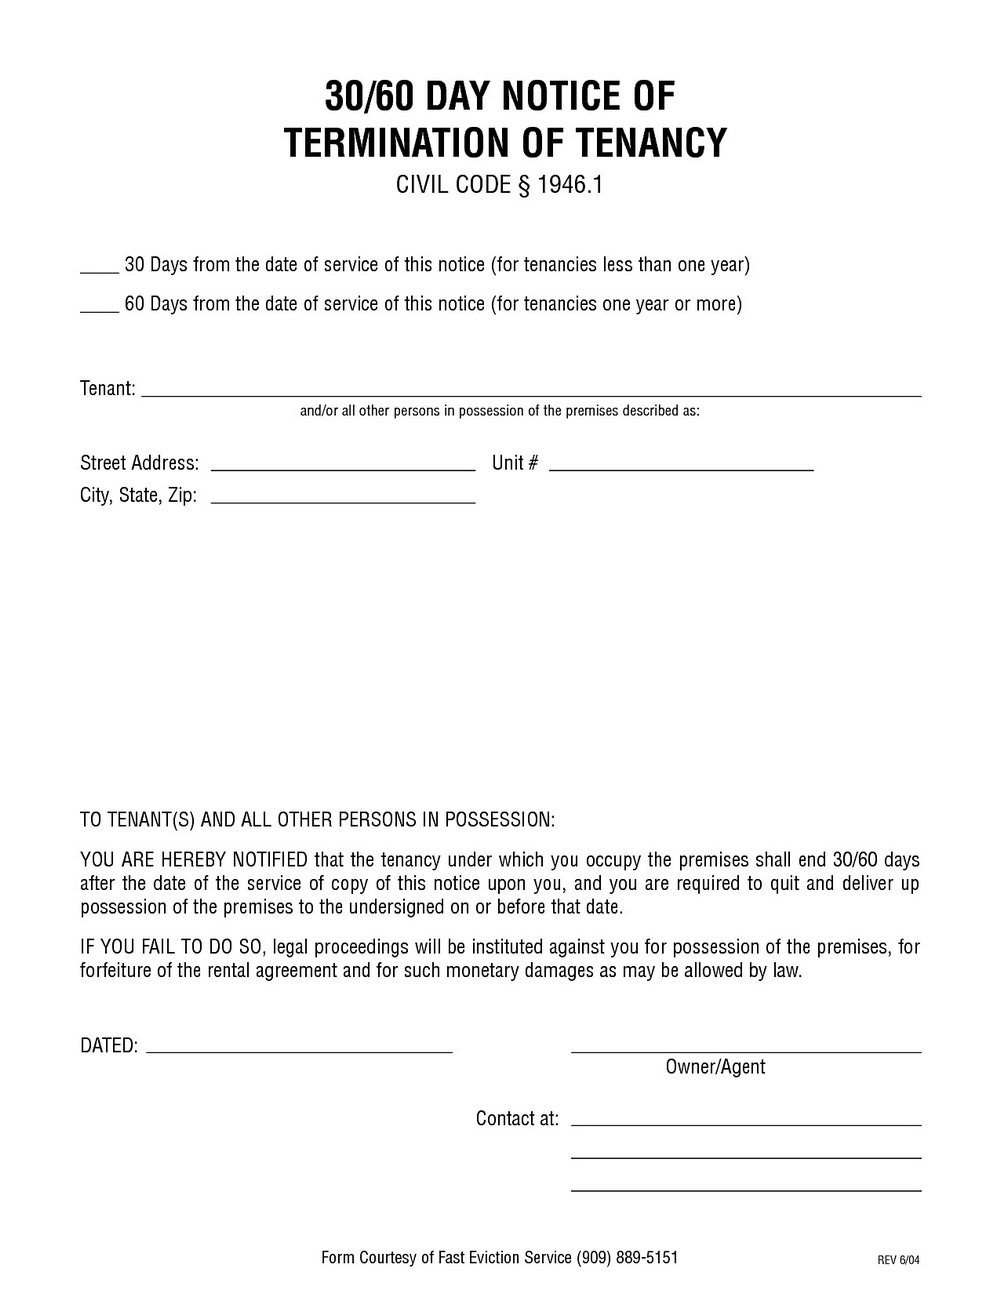 Baltimore City Eviction Notice Form